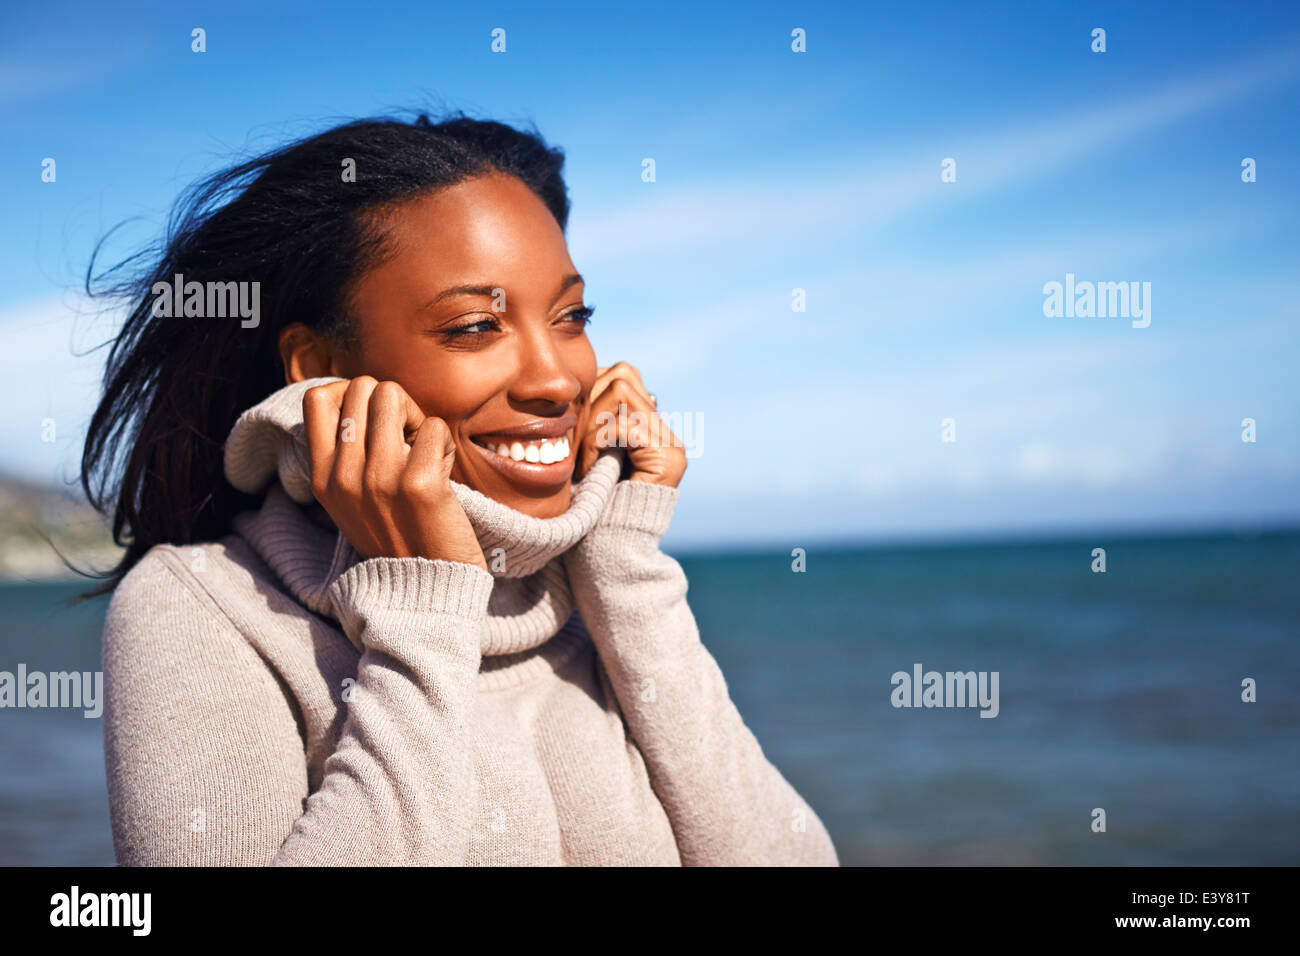 Portrait of young woman holding rollneck on sweater at beach, Malibu, California, USA Stock Photo